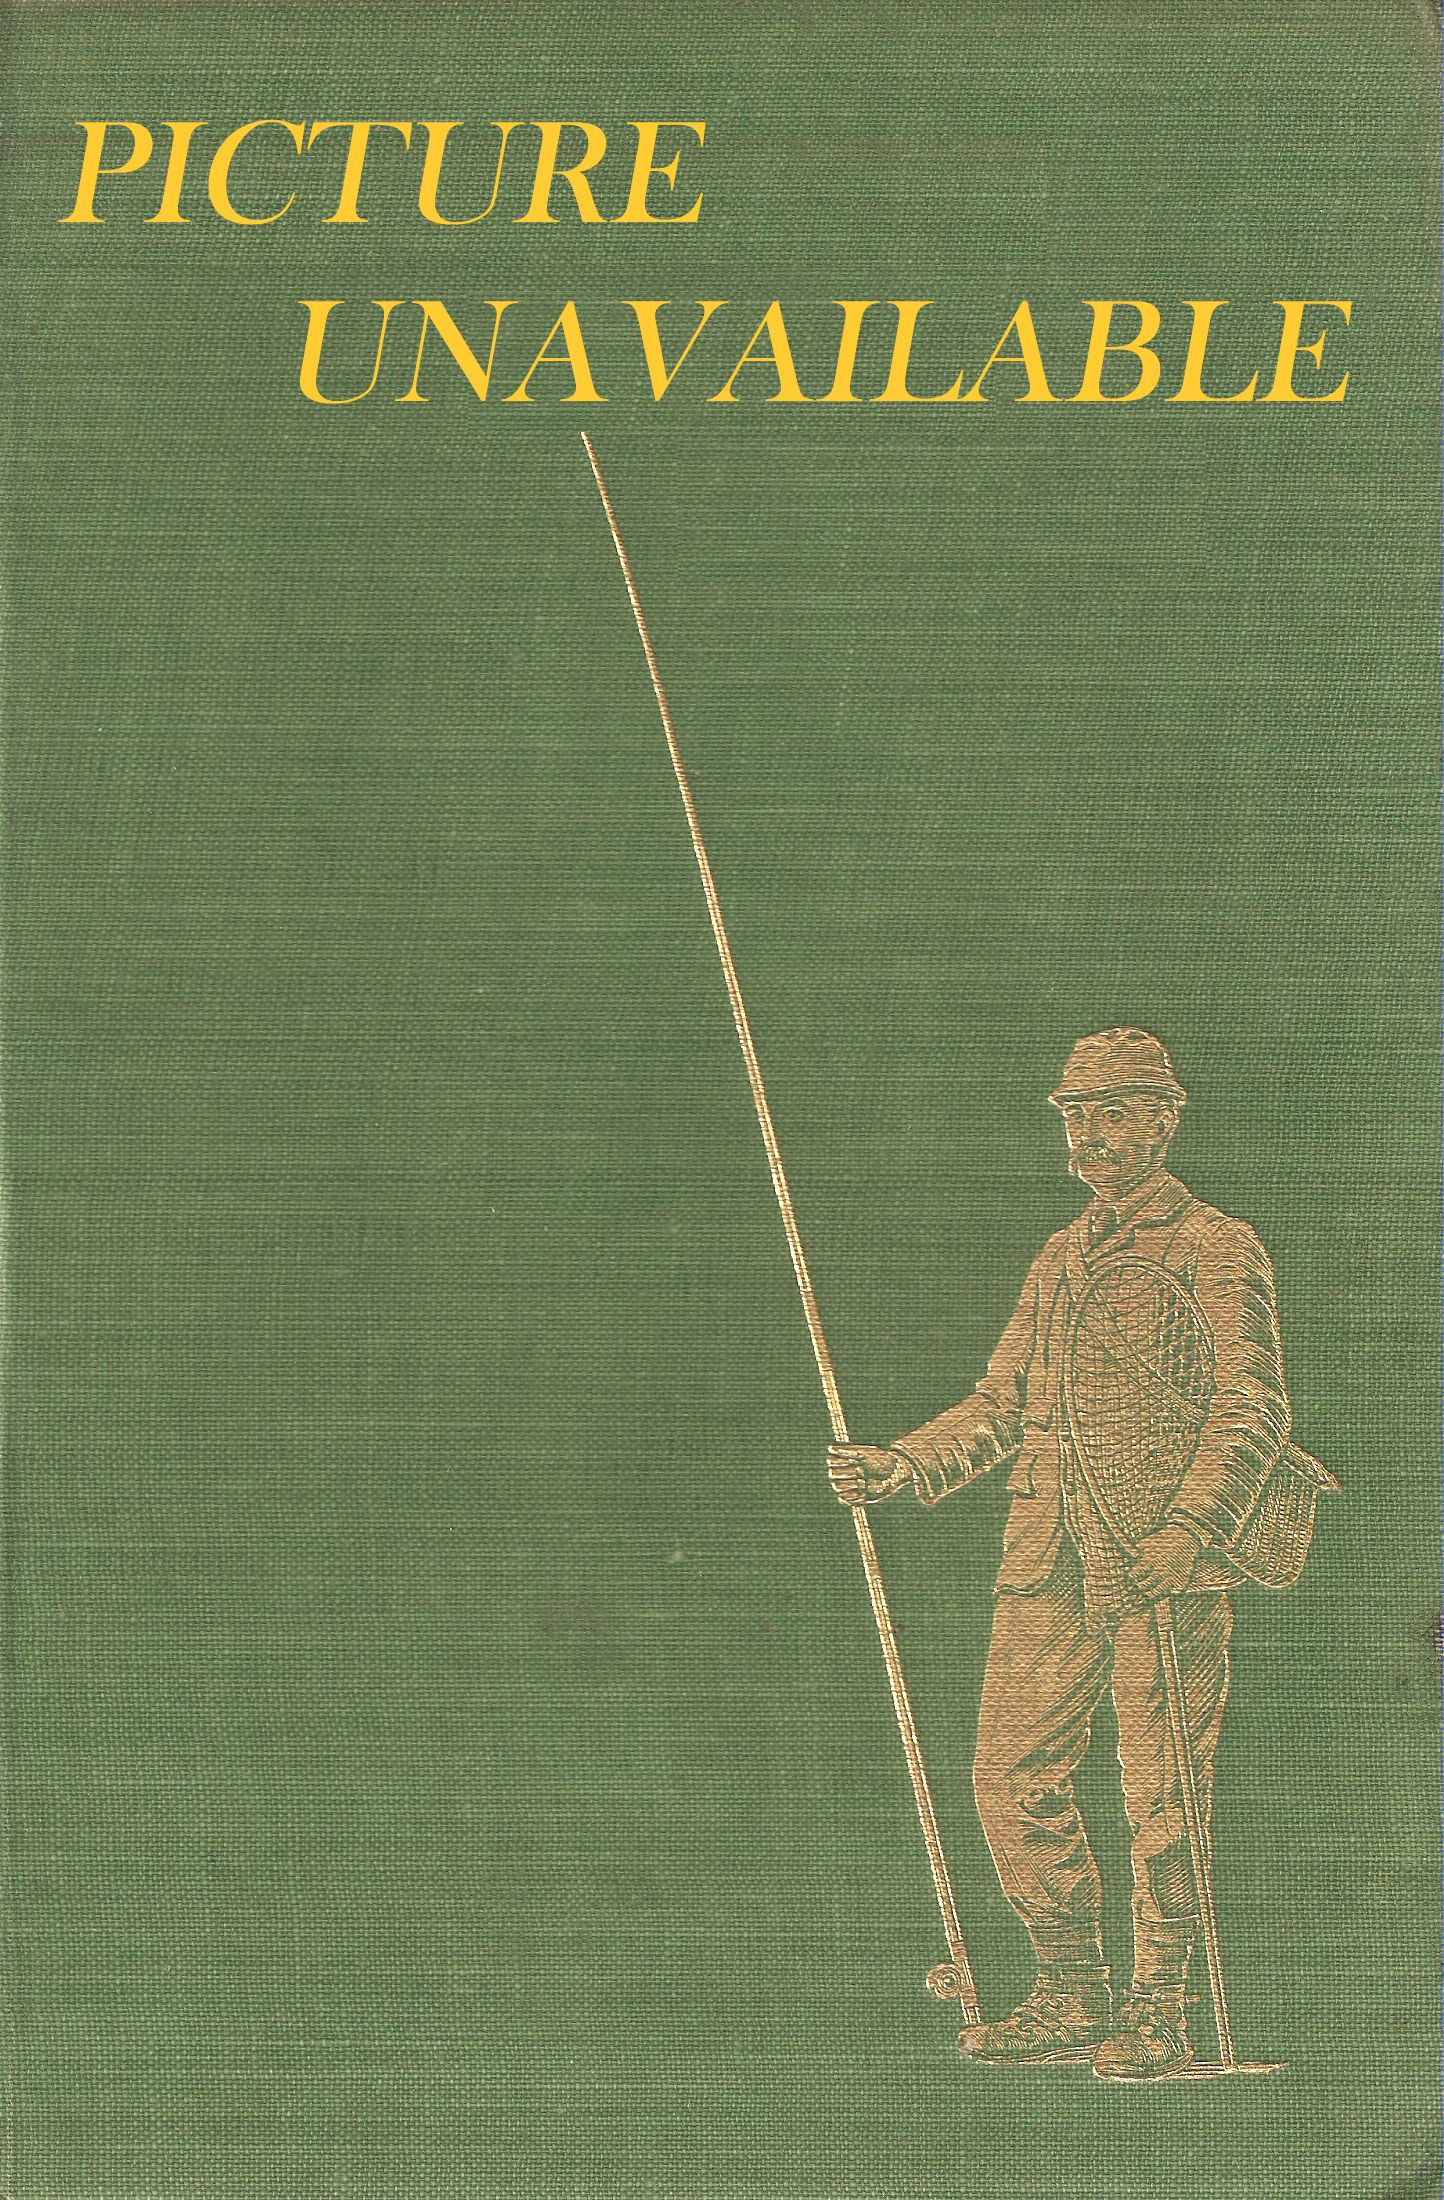 THE ANGLING TIMES BOOK. Edited by Bernard Venables and Howard Marshall.  Volume I.